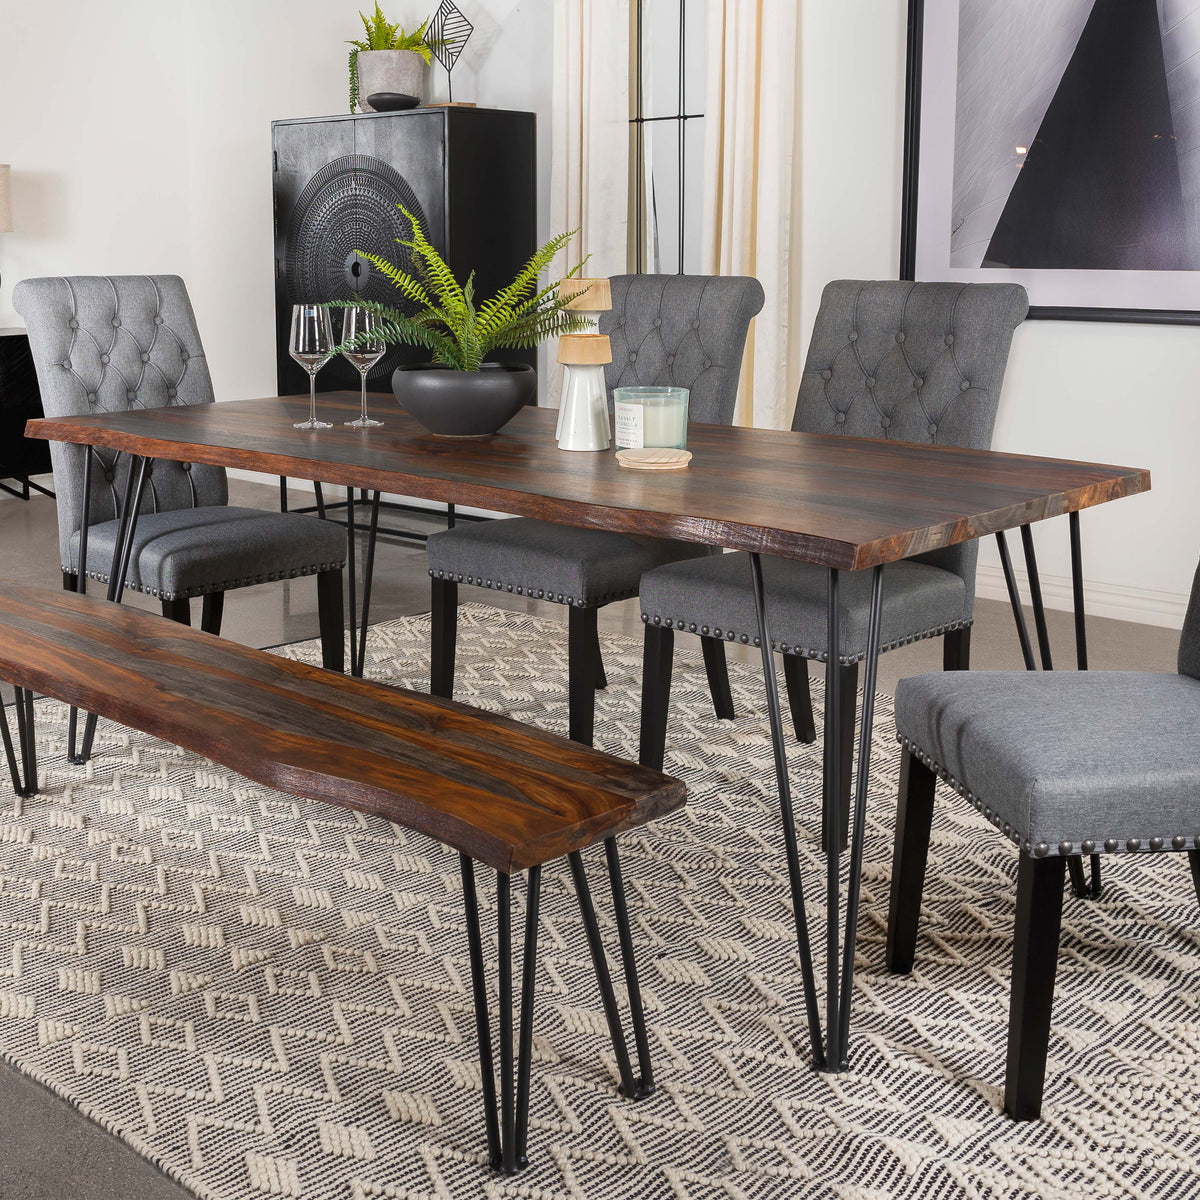 Neve Live-edge Dining Table with Hairpin Legs Sheesham Grey and Gunmetal Neve Live-edge Dining Table with Hairpin Legs Sheesham Grey and Gunmetal Half Price Furniture